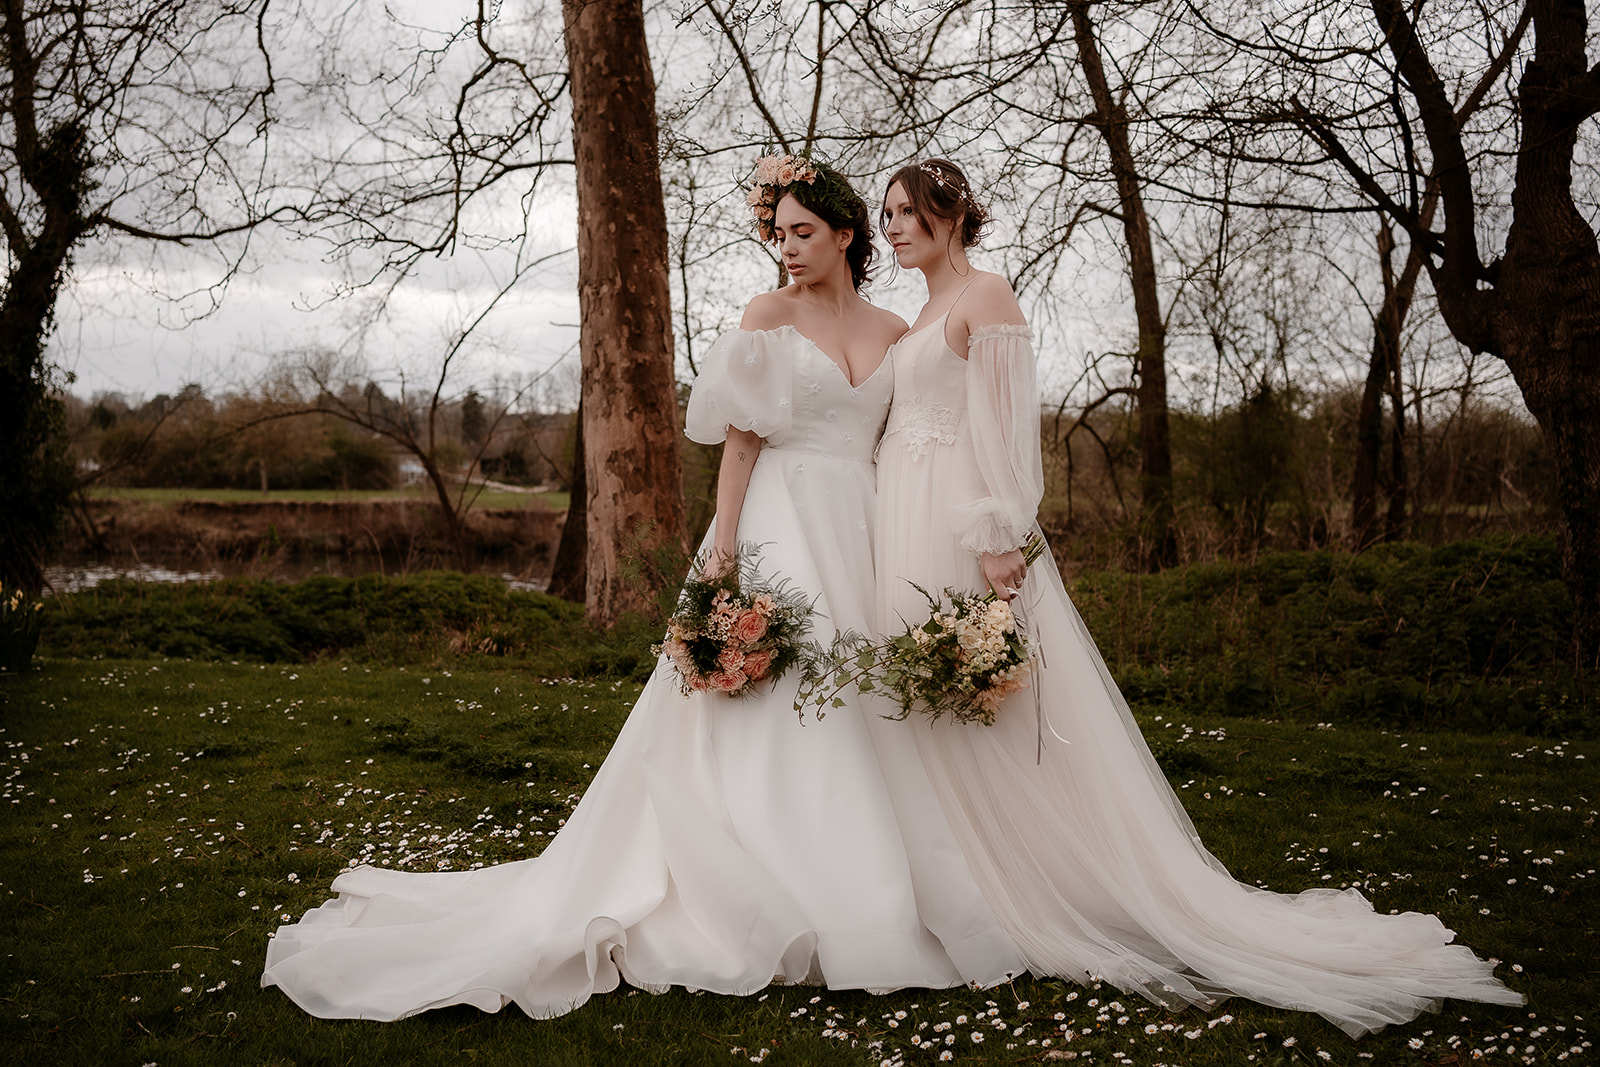 Two brides stand together among the daisies at Mapledurham House wedding venue